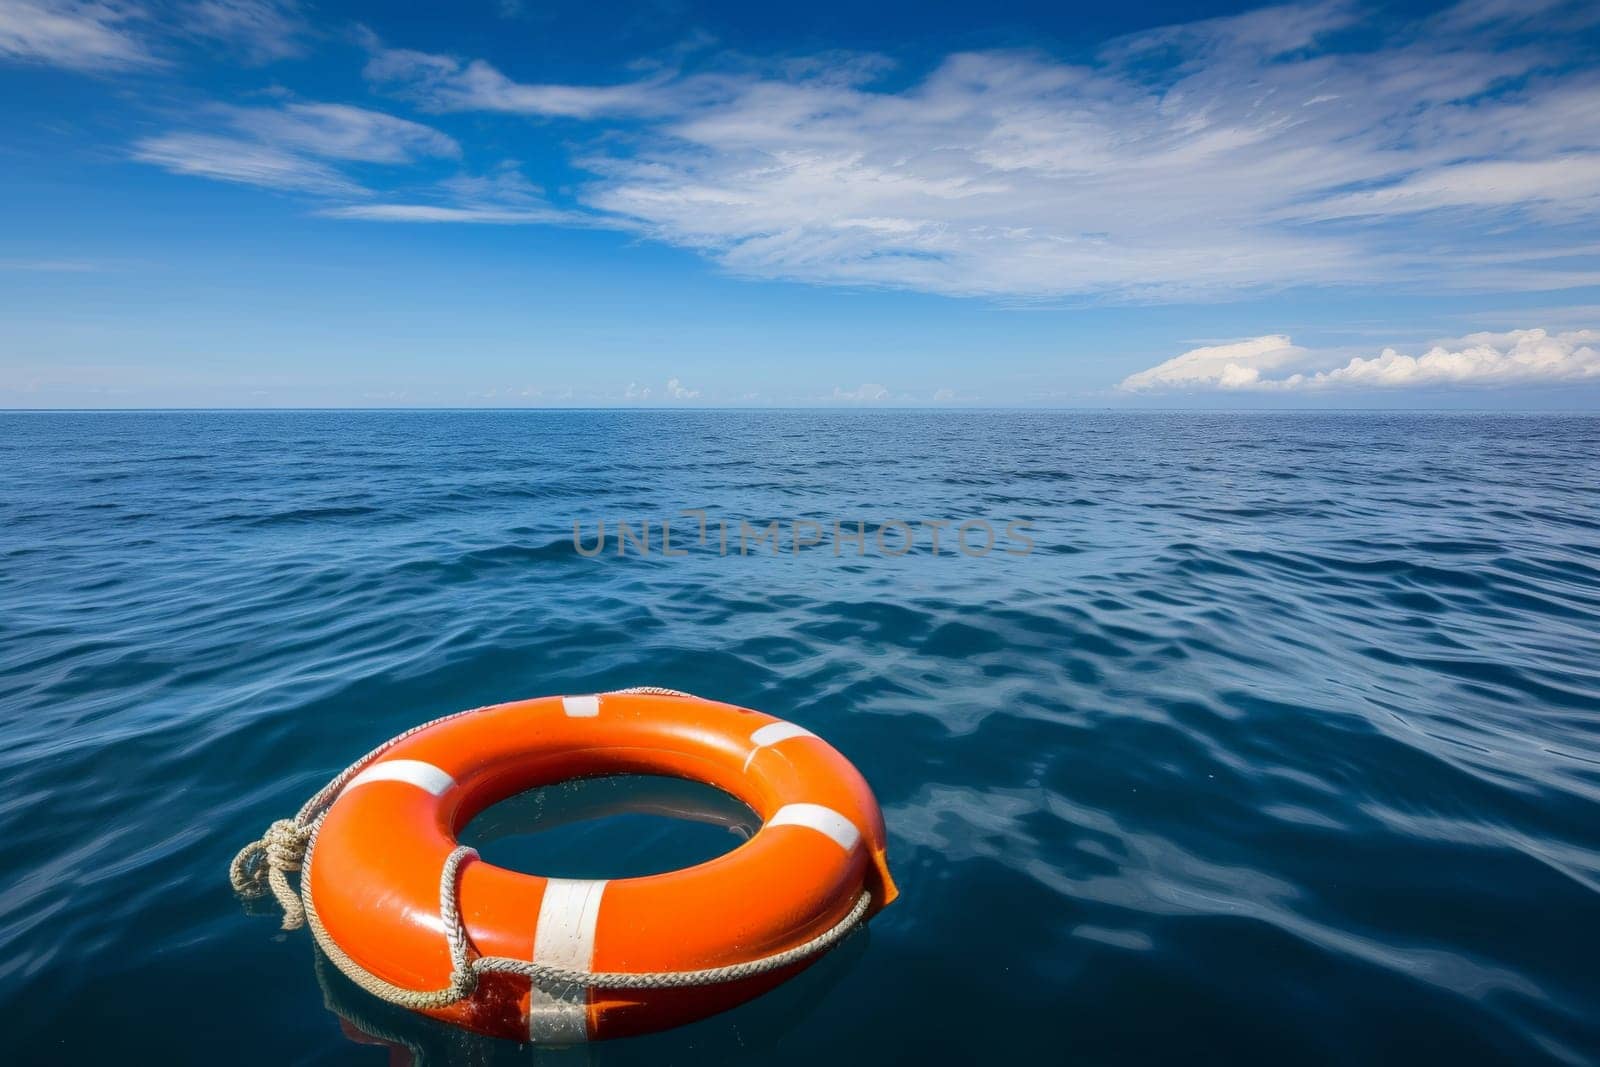 An orange lifebuoy floats on the open sea, symbolizing safety and hope under the vast sky by nijieimu